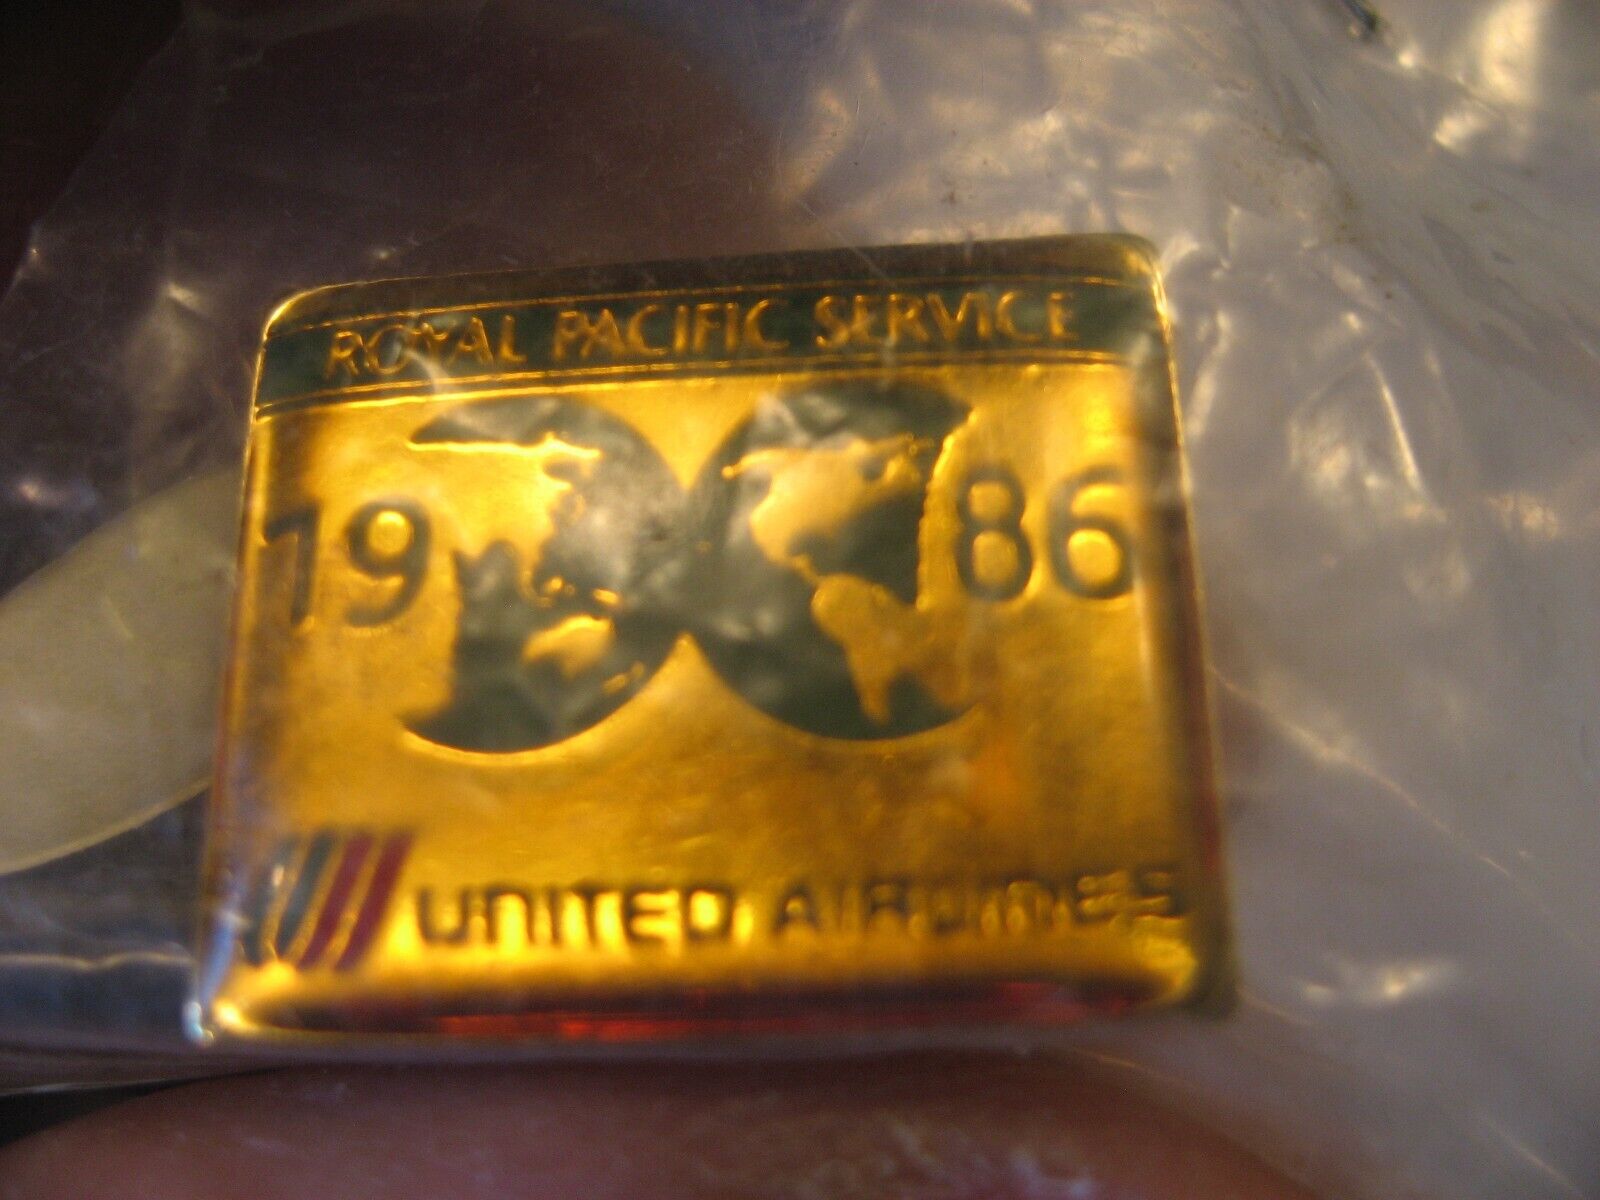 Vintage United Airlines Royal Pacific Service Gold 1986 Pin